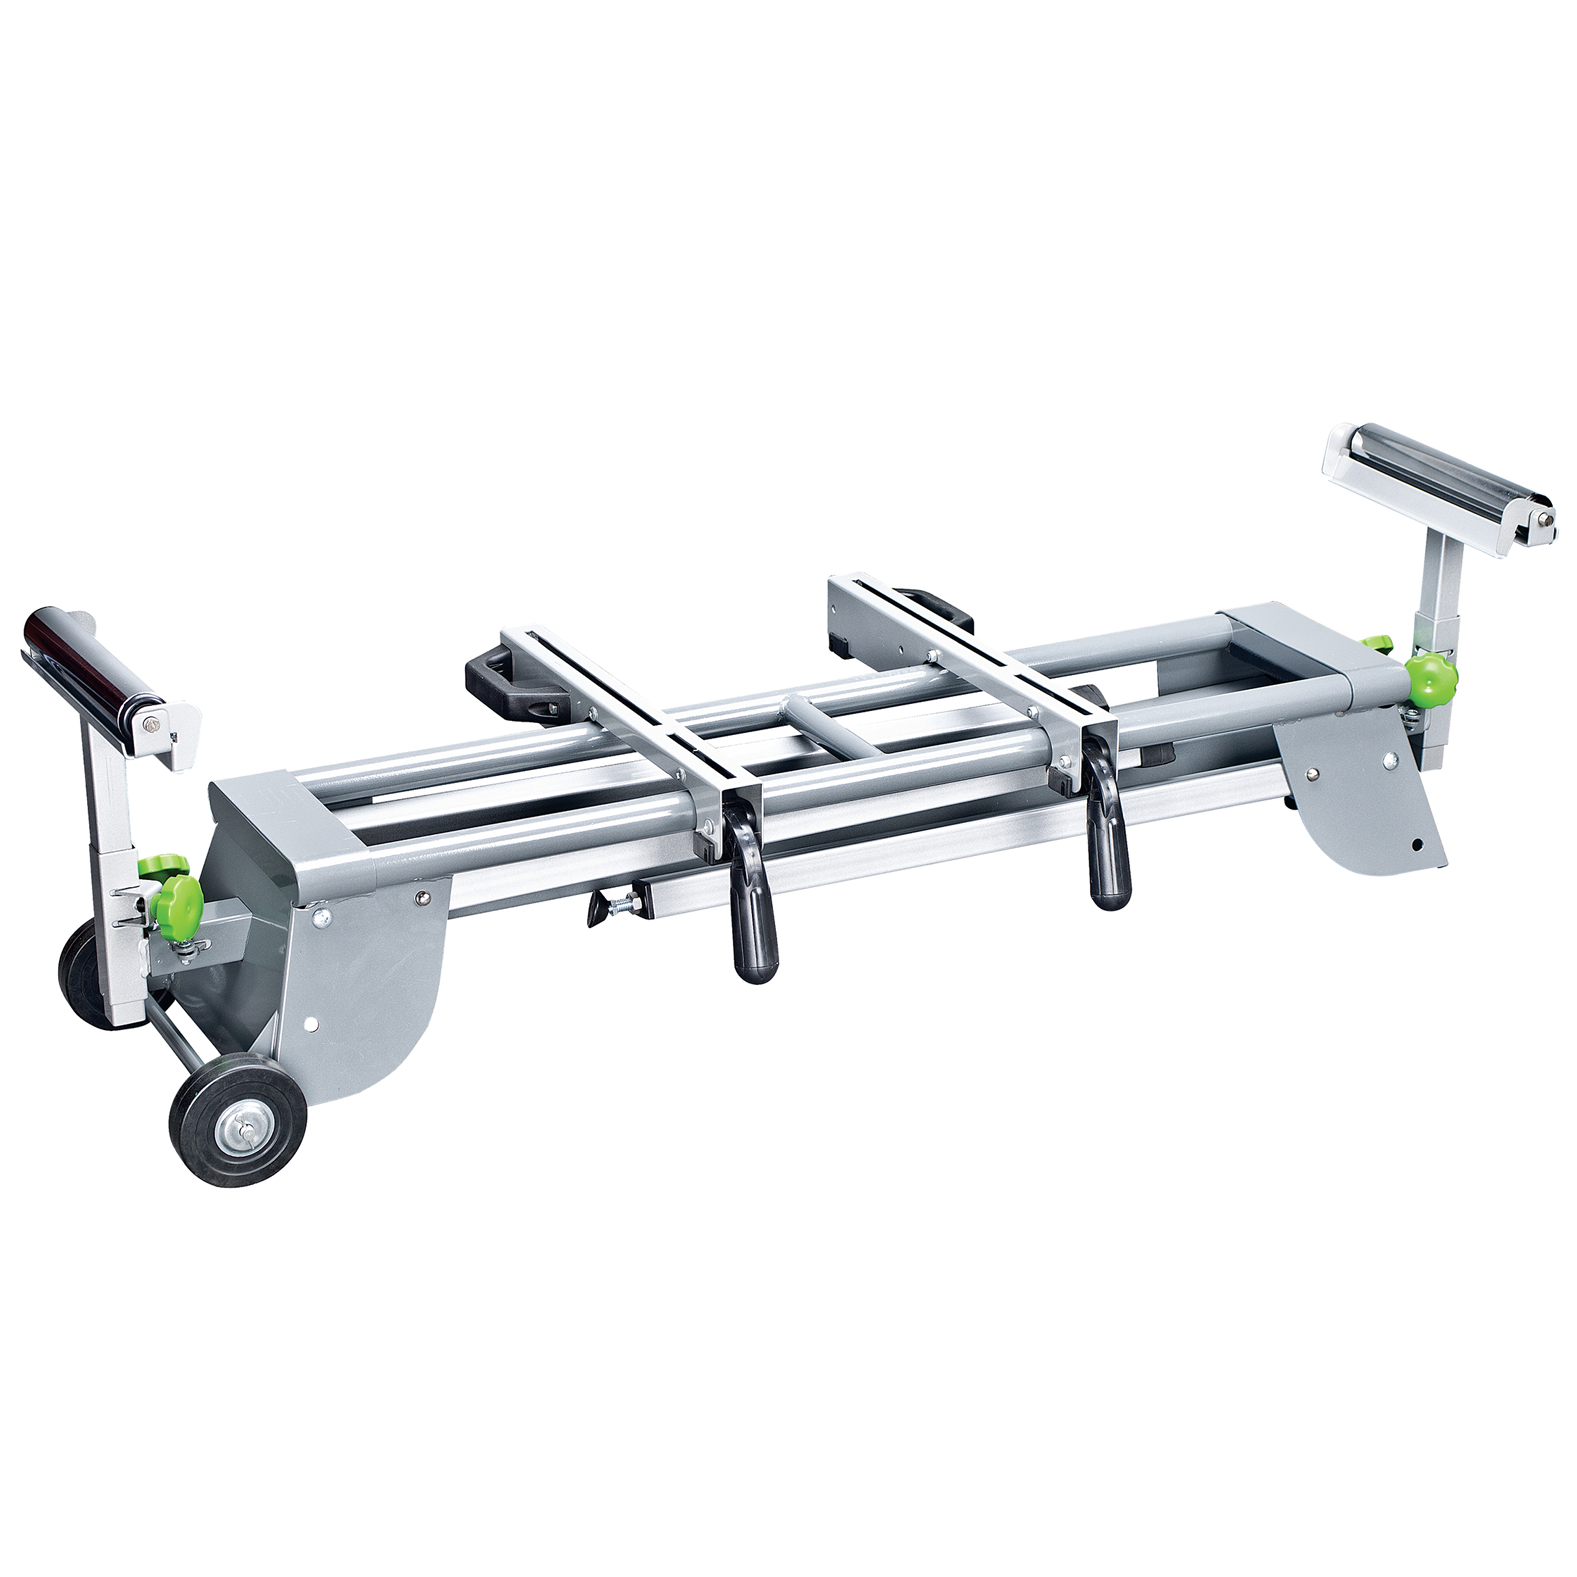 Bentism Planer Stand 100 lbs Heavy Loads 3-gear Height Saw Stand w/ 4 Casters, Size: 27.7 x 23.7 x 35.4 in / 70.3 × 60.3 × 90 cm, Black